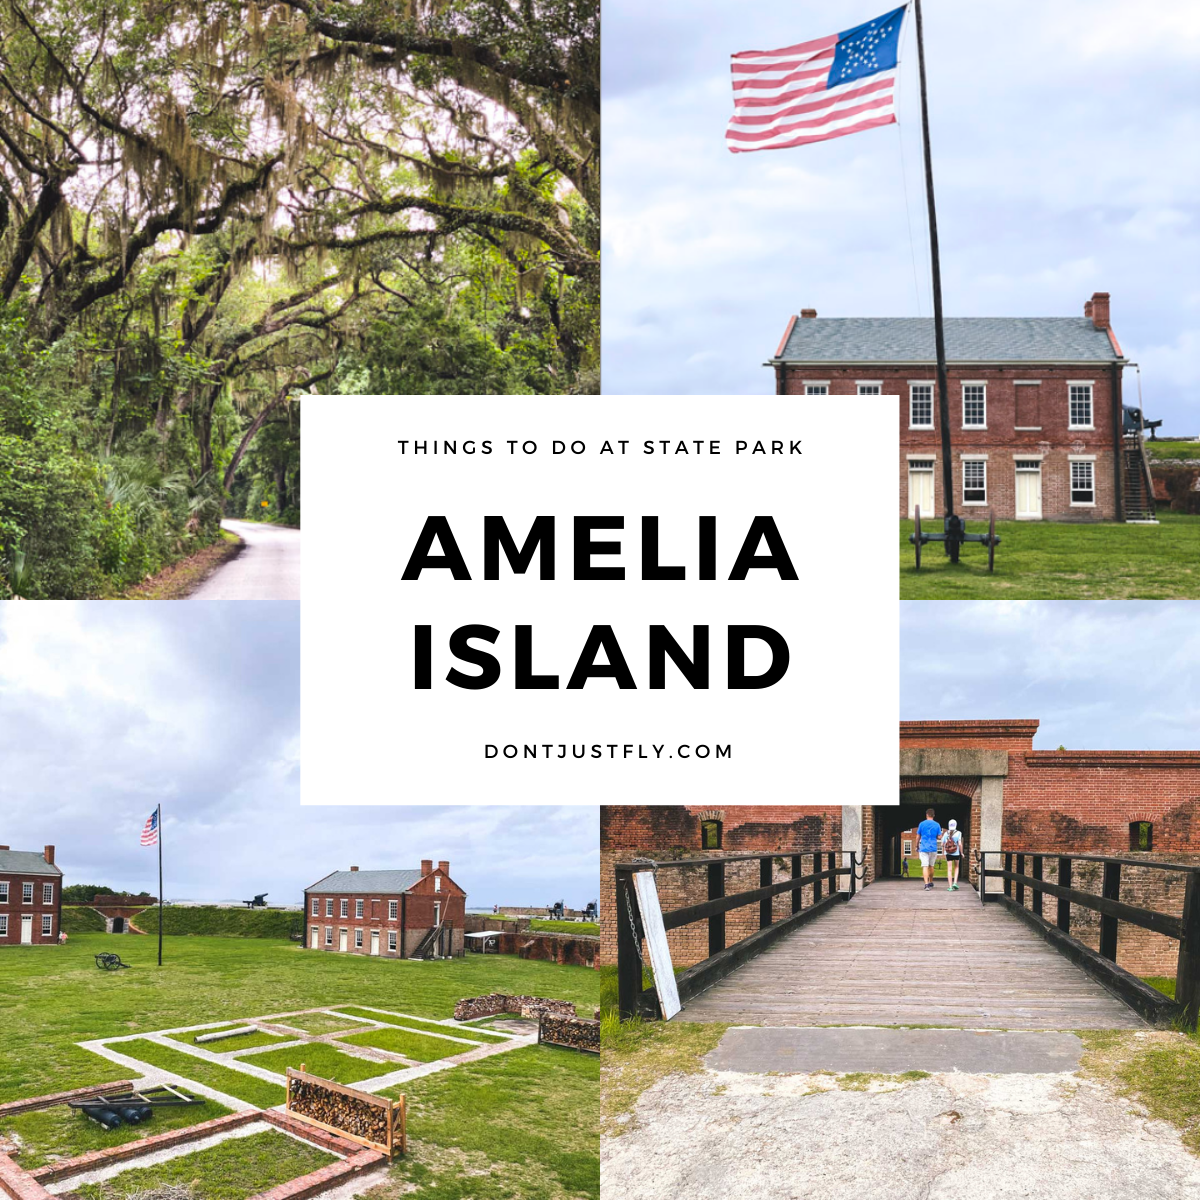 A photo collage shows several scenes from Amelia Island State Park.